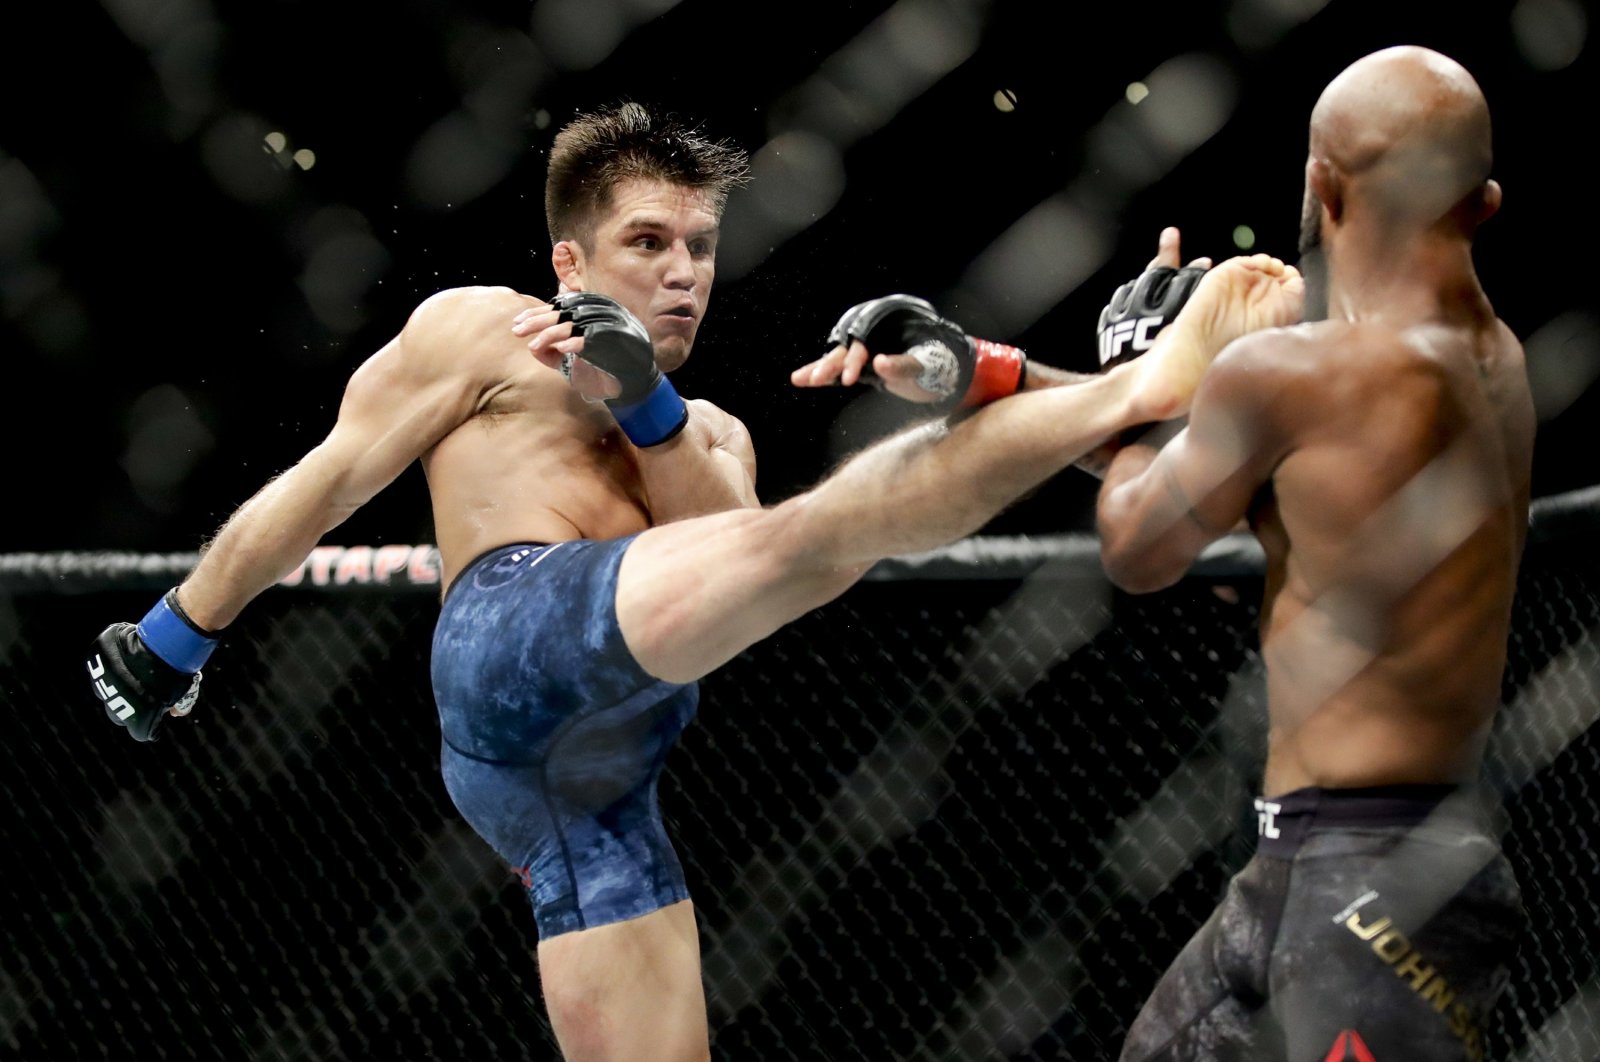 Henry Cejudo kicks Demetrious Johnson during their UFC flyweight title mixed martial arts bout at UFC 227 in Los Angeles, Aug. 4, 2018. (AP Photo)